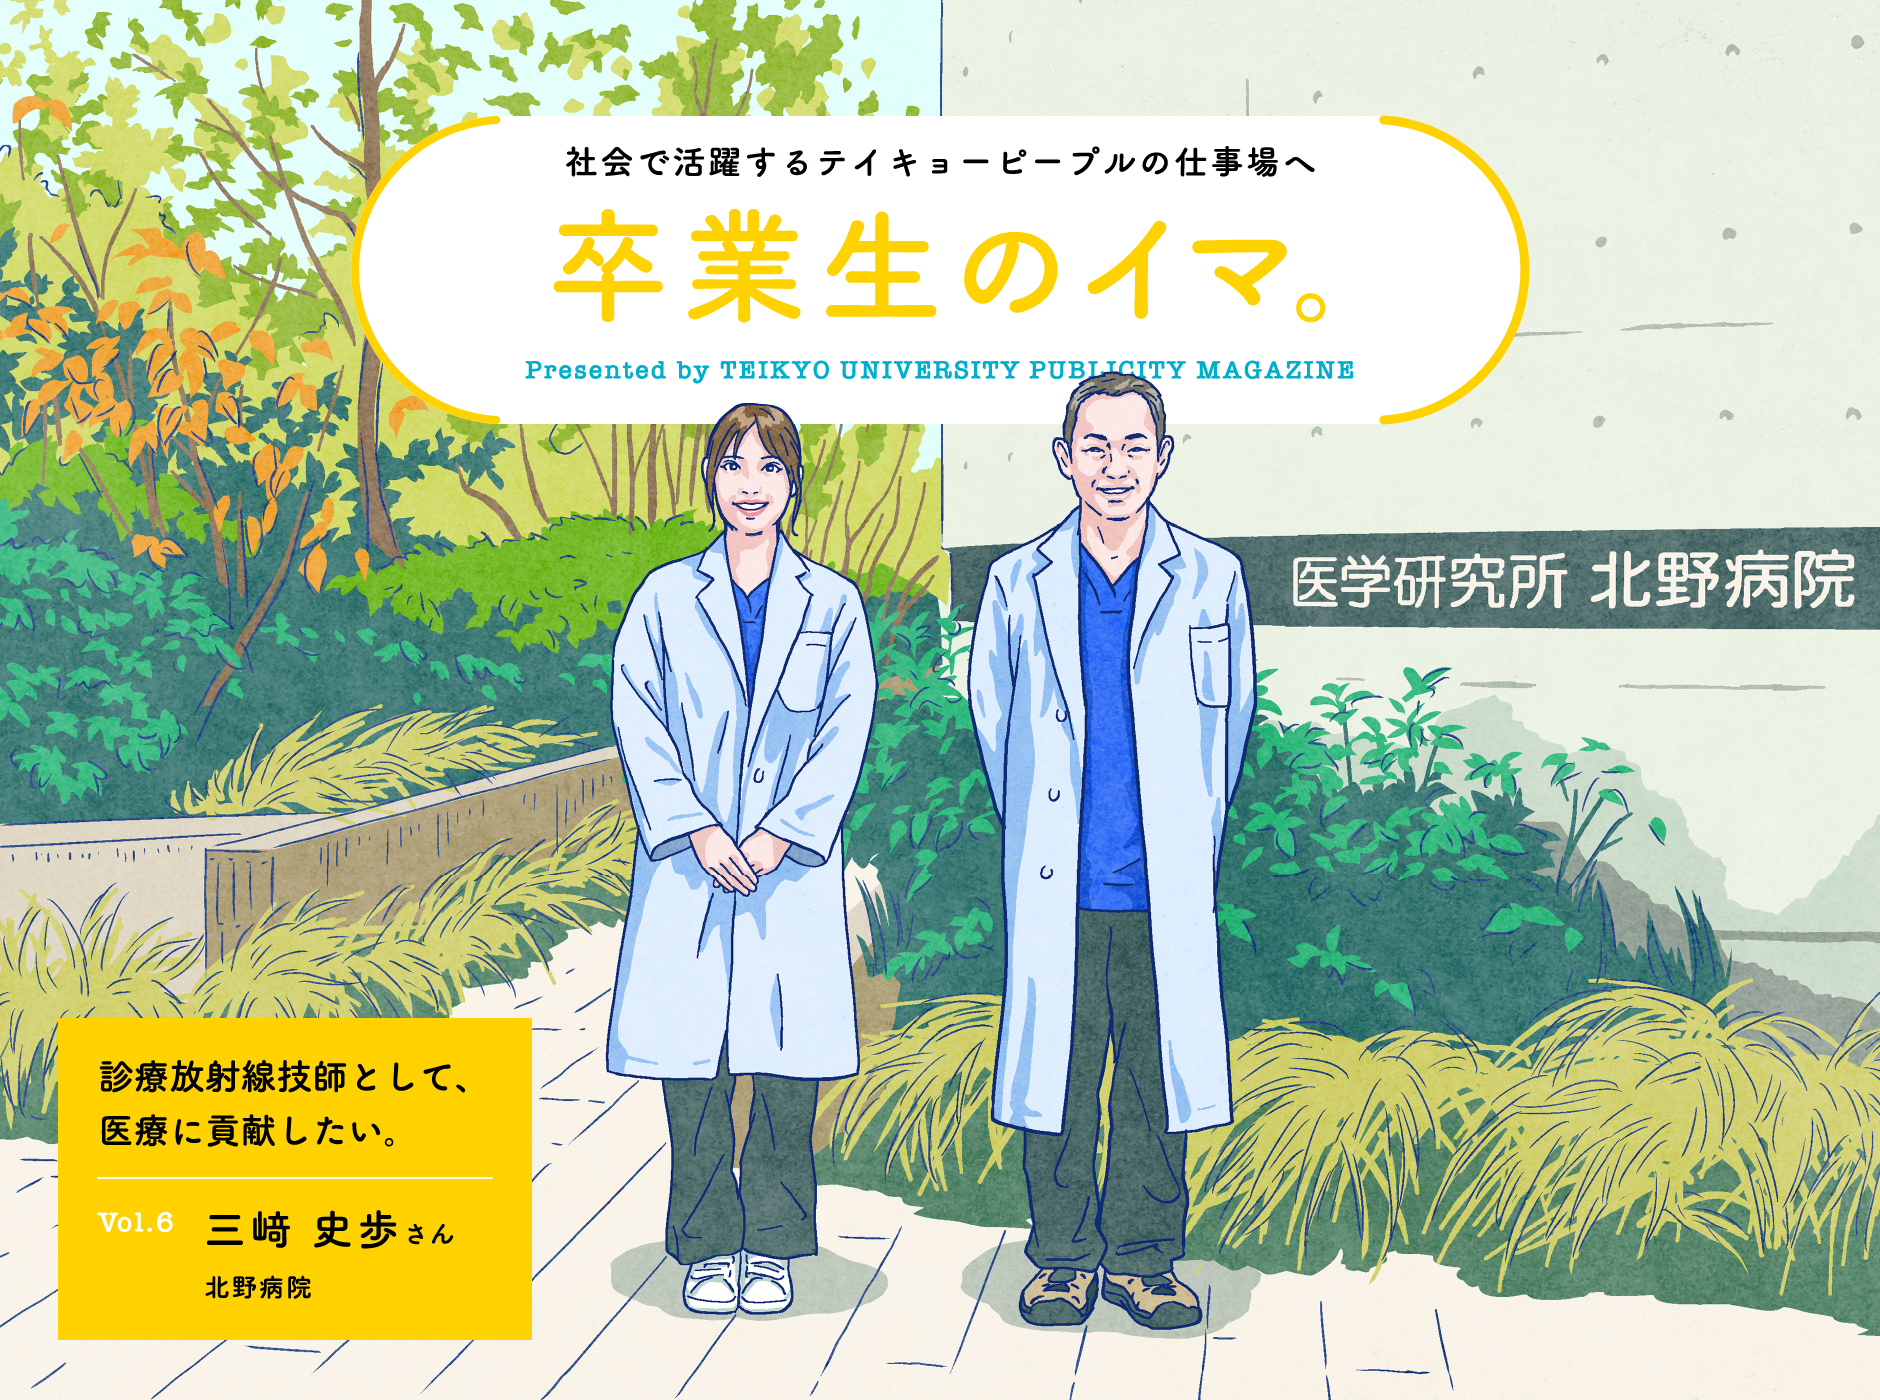 > Alumni Now Vol. 6 I want to contribute to medical care as radiological technologist. Fumiho Misaki, Kitano Hospital